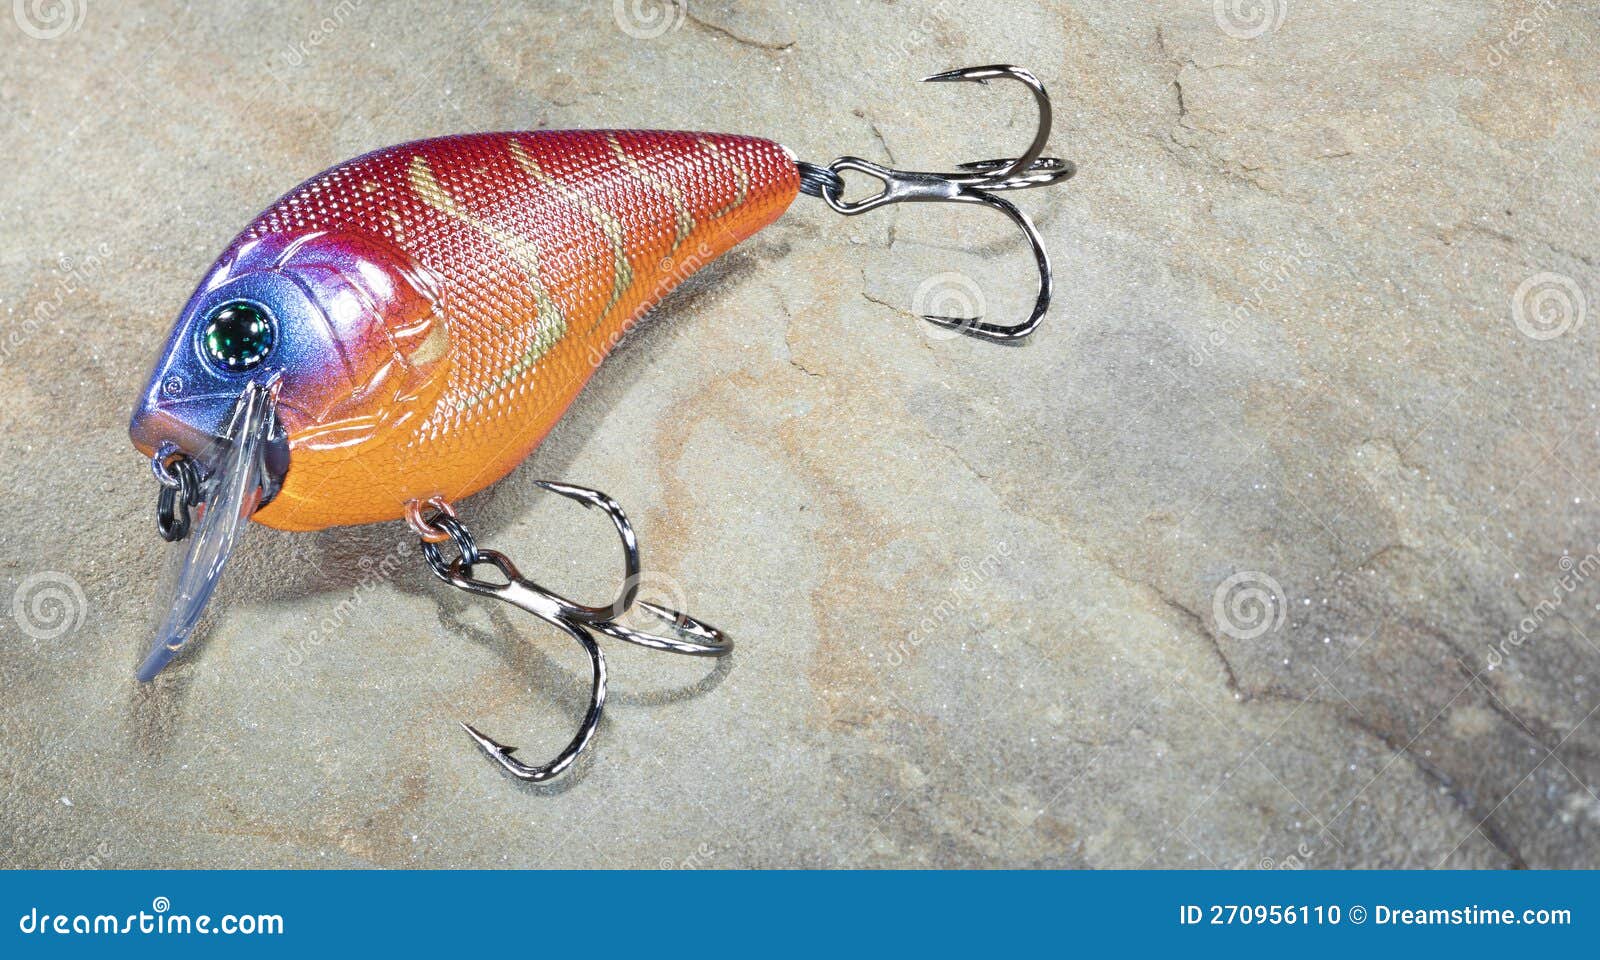 Bright Fishing Lure on a Rock Stock Photo - Image of leisure